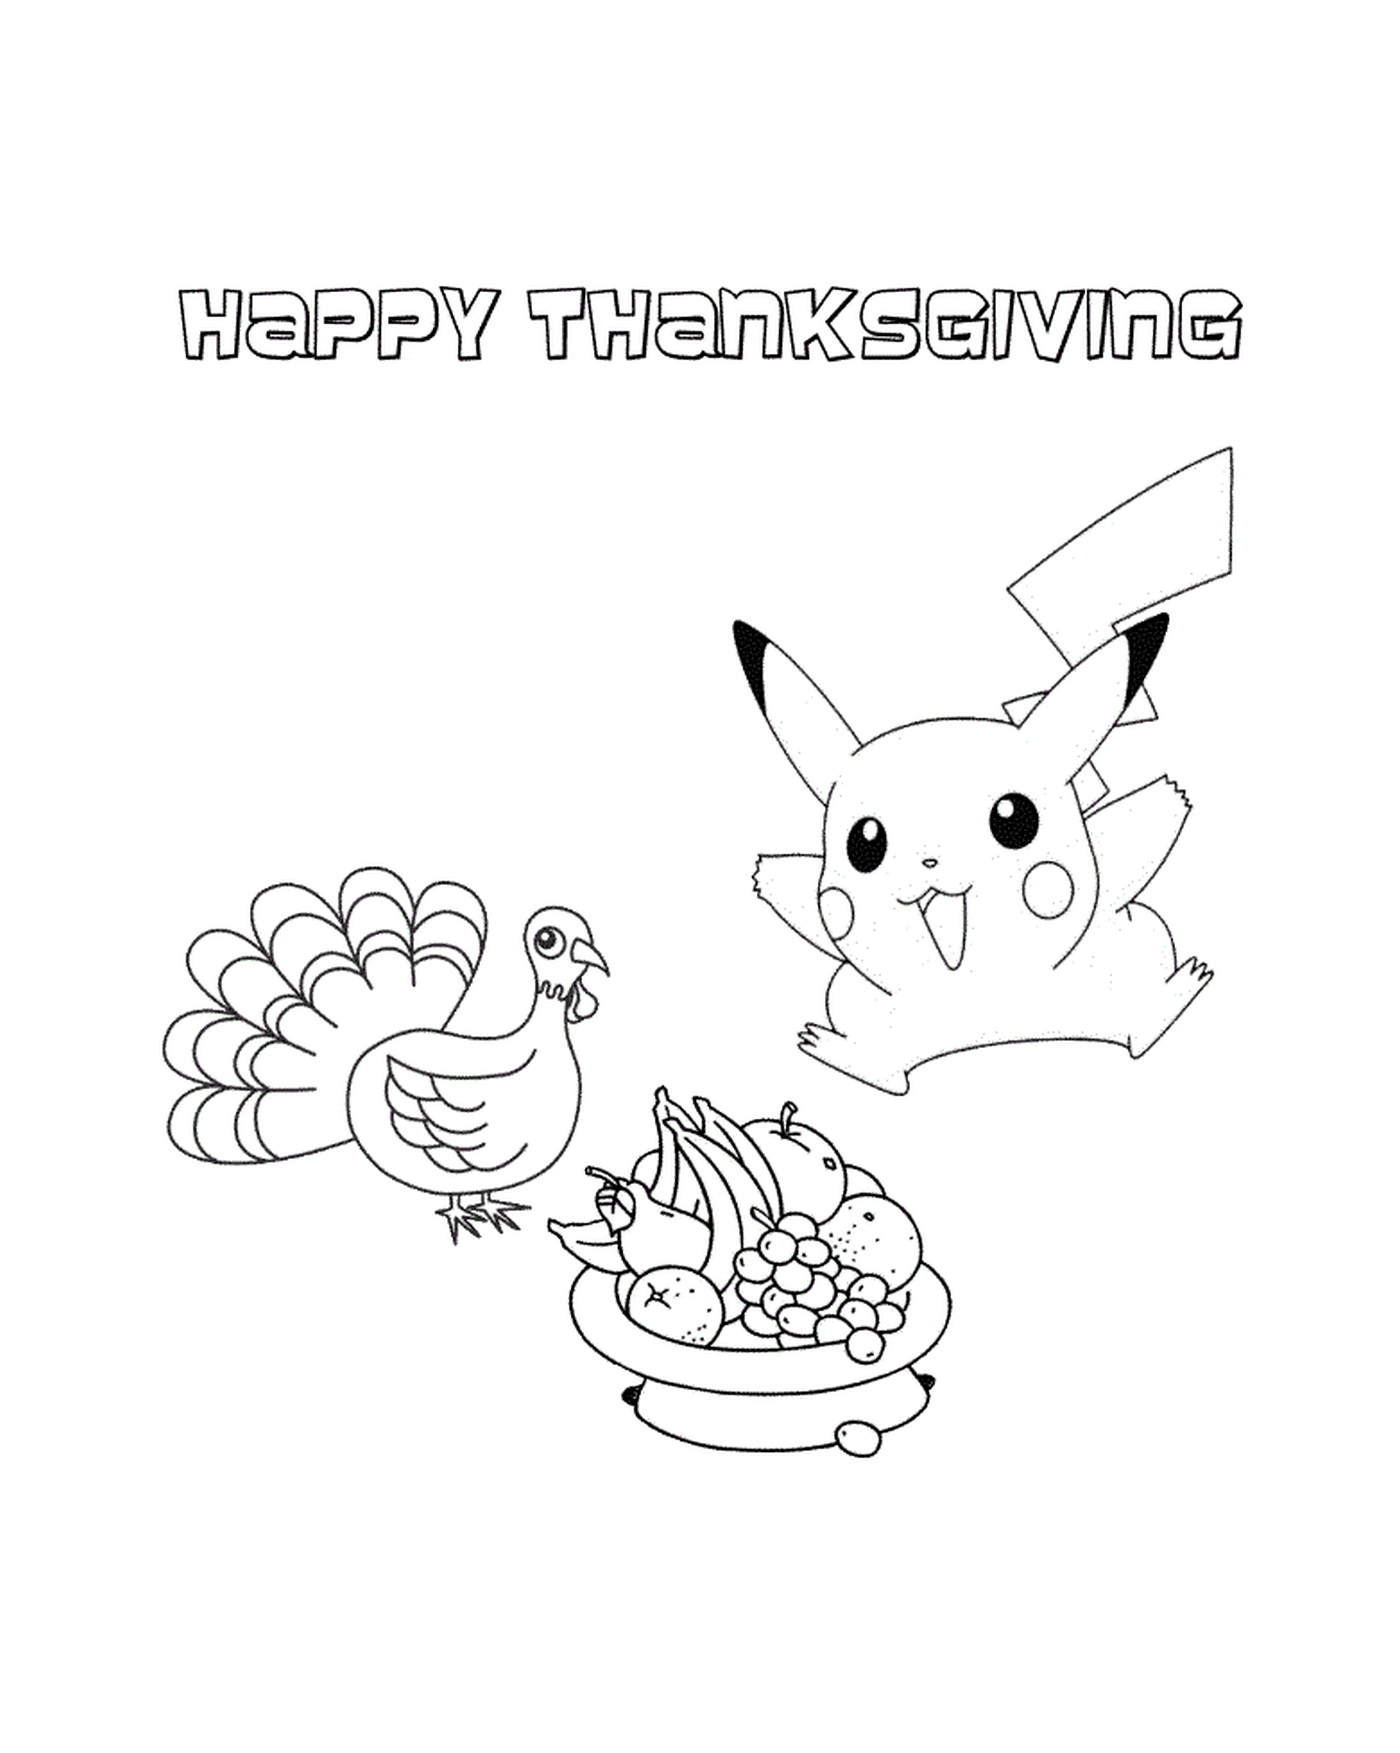 pikachu with thanksgiving turkey coloring page